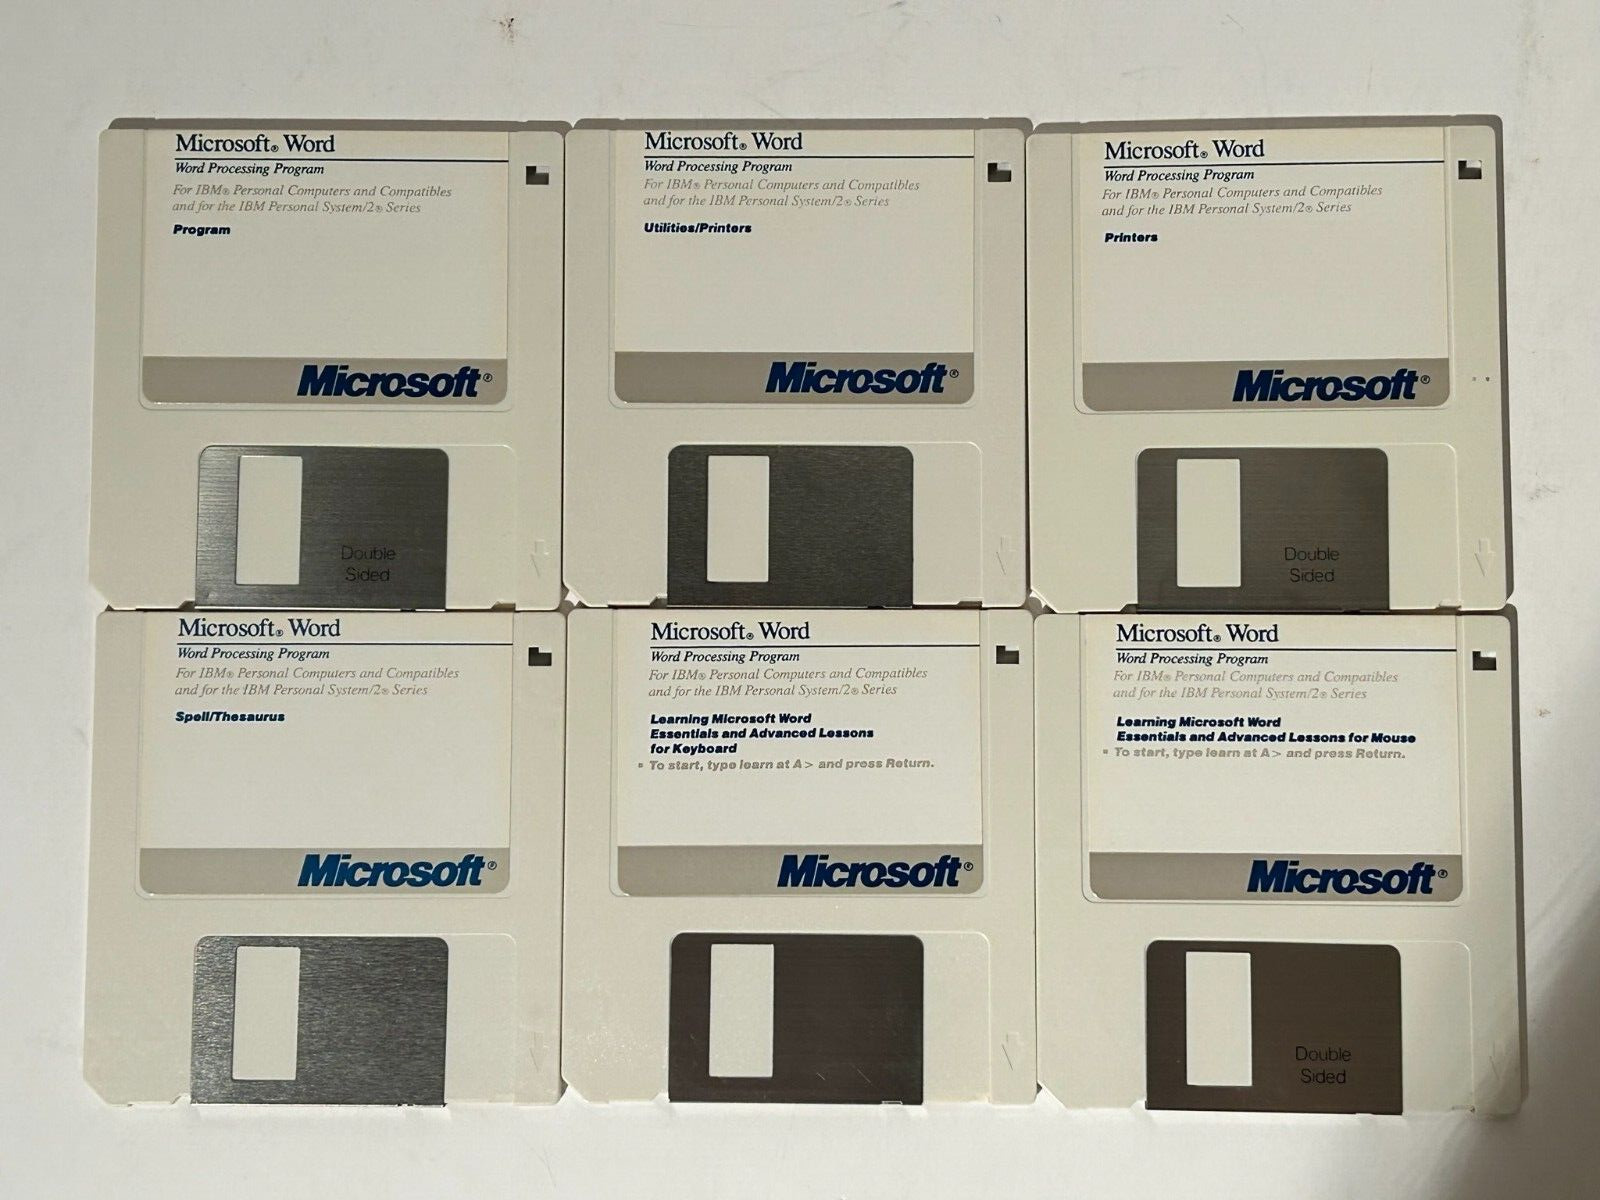 Vintage Software: Microsoft Word for IBM Personal OS/2 Series Version 5.0, 1988